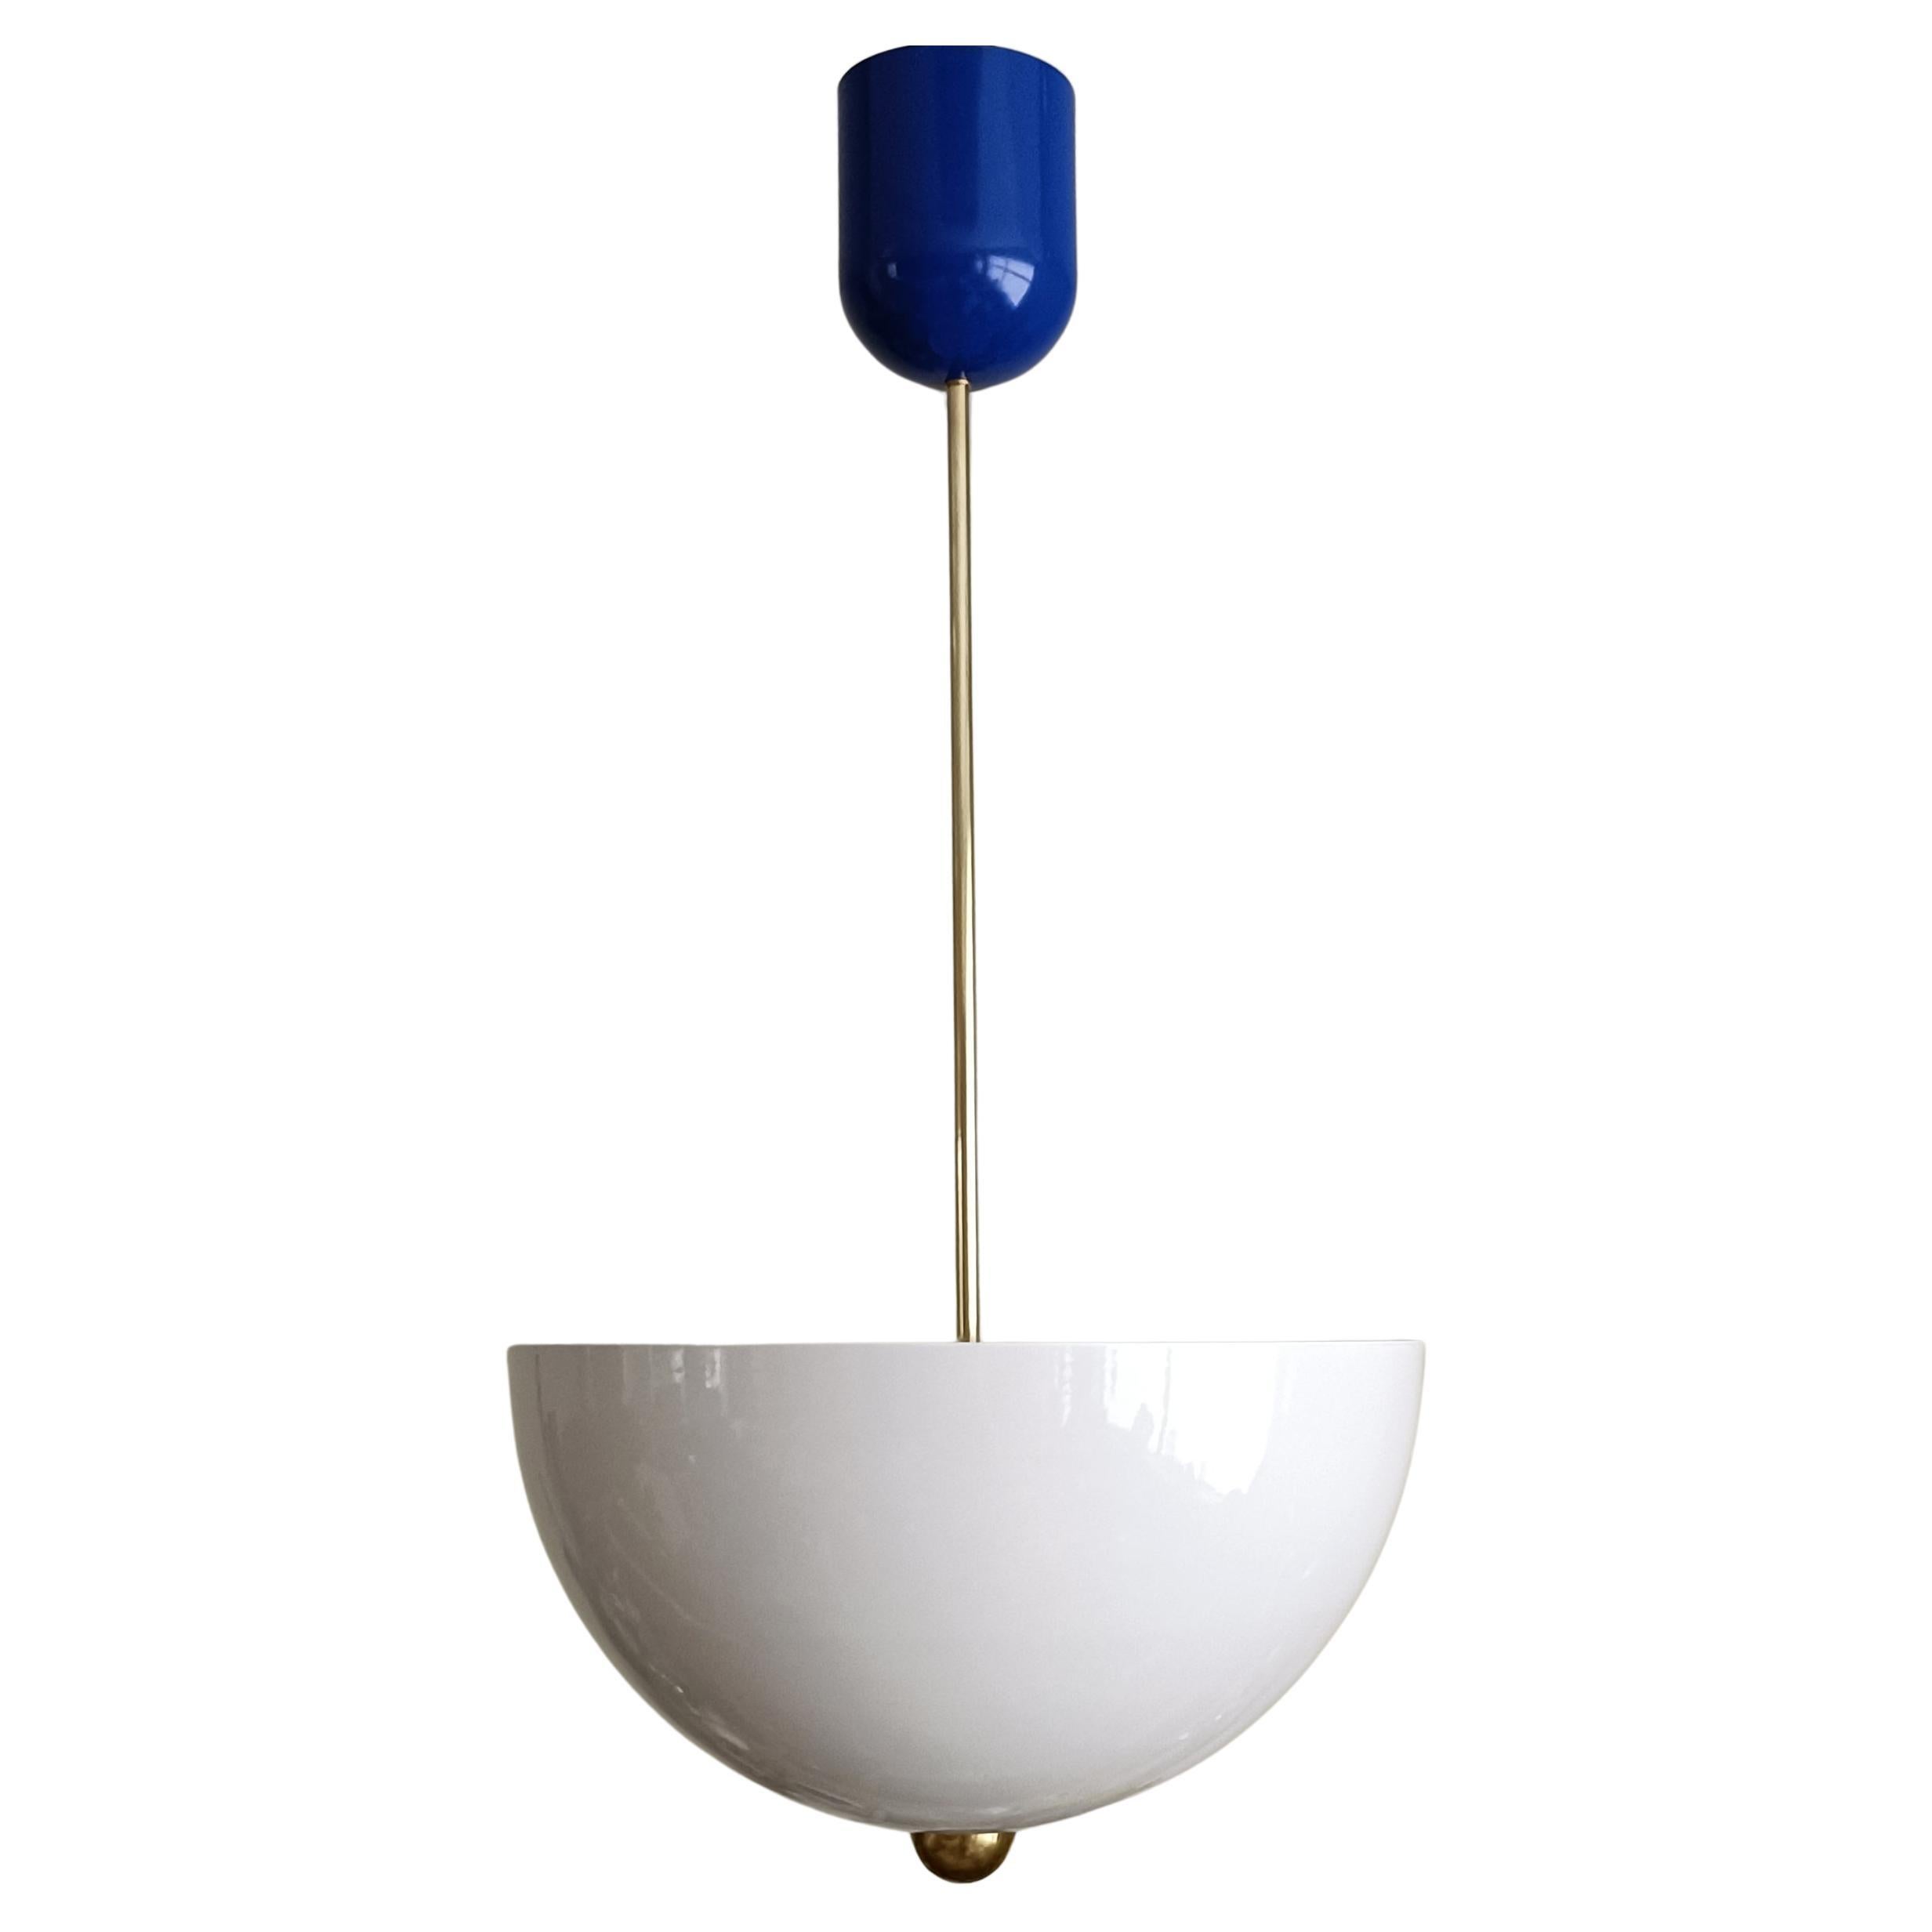 Lebos - large pendant by Candas Design, White cream/navy blue and brass For Sale